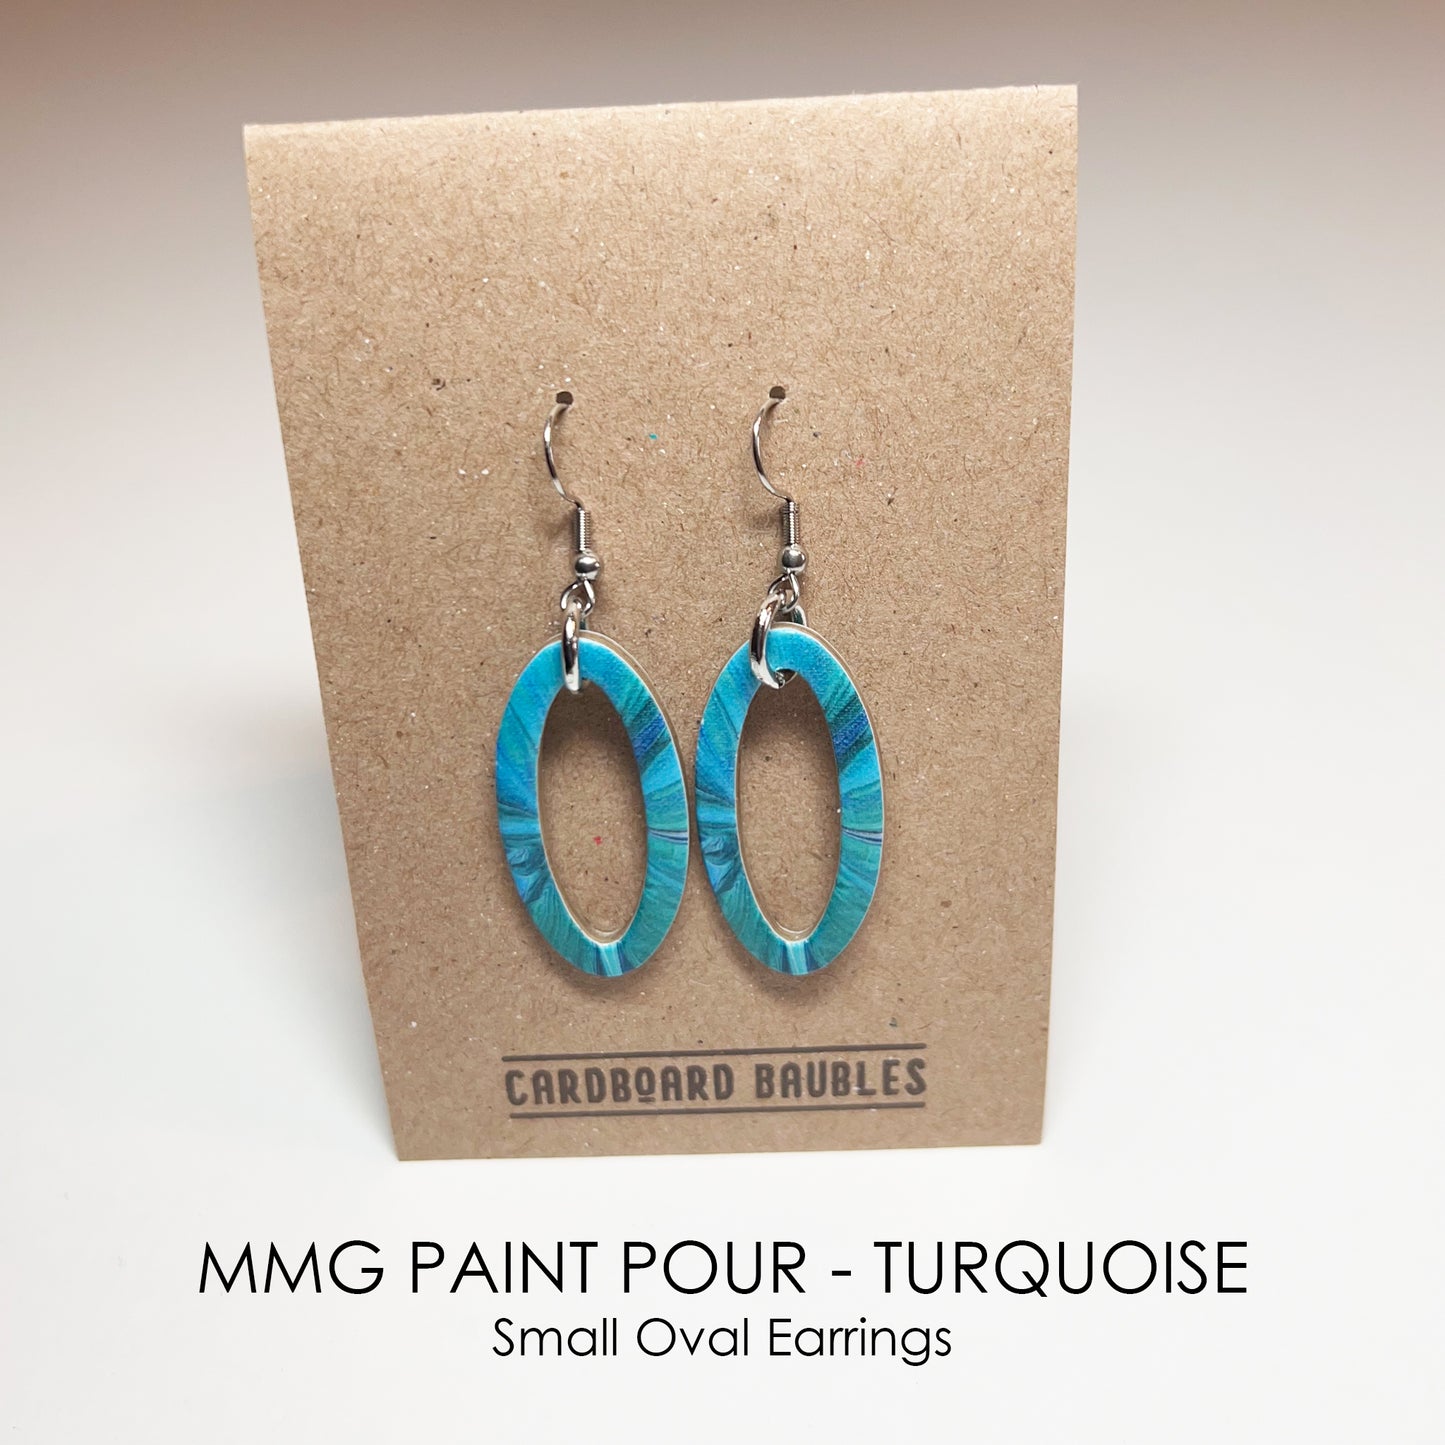 MMG PAINT POUR - TURQUOISE - Oval Cardboard Baubles Earrings